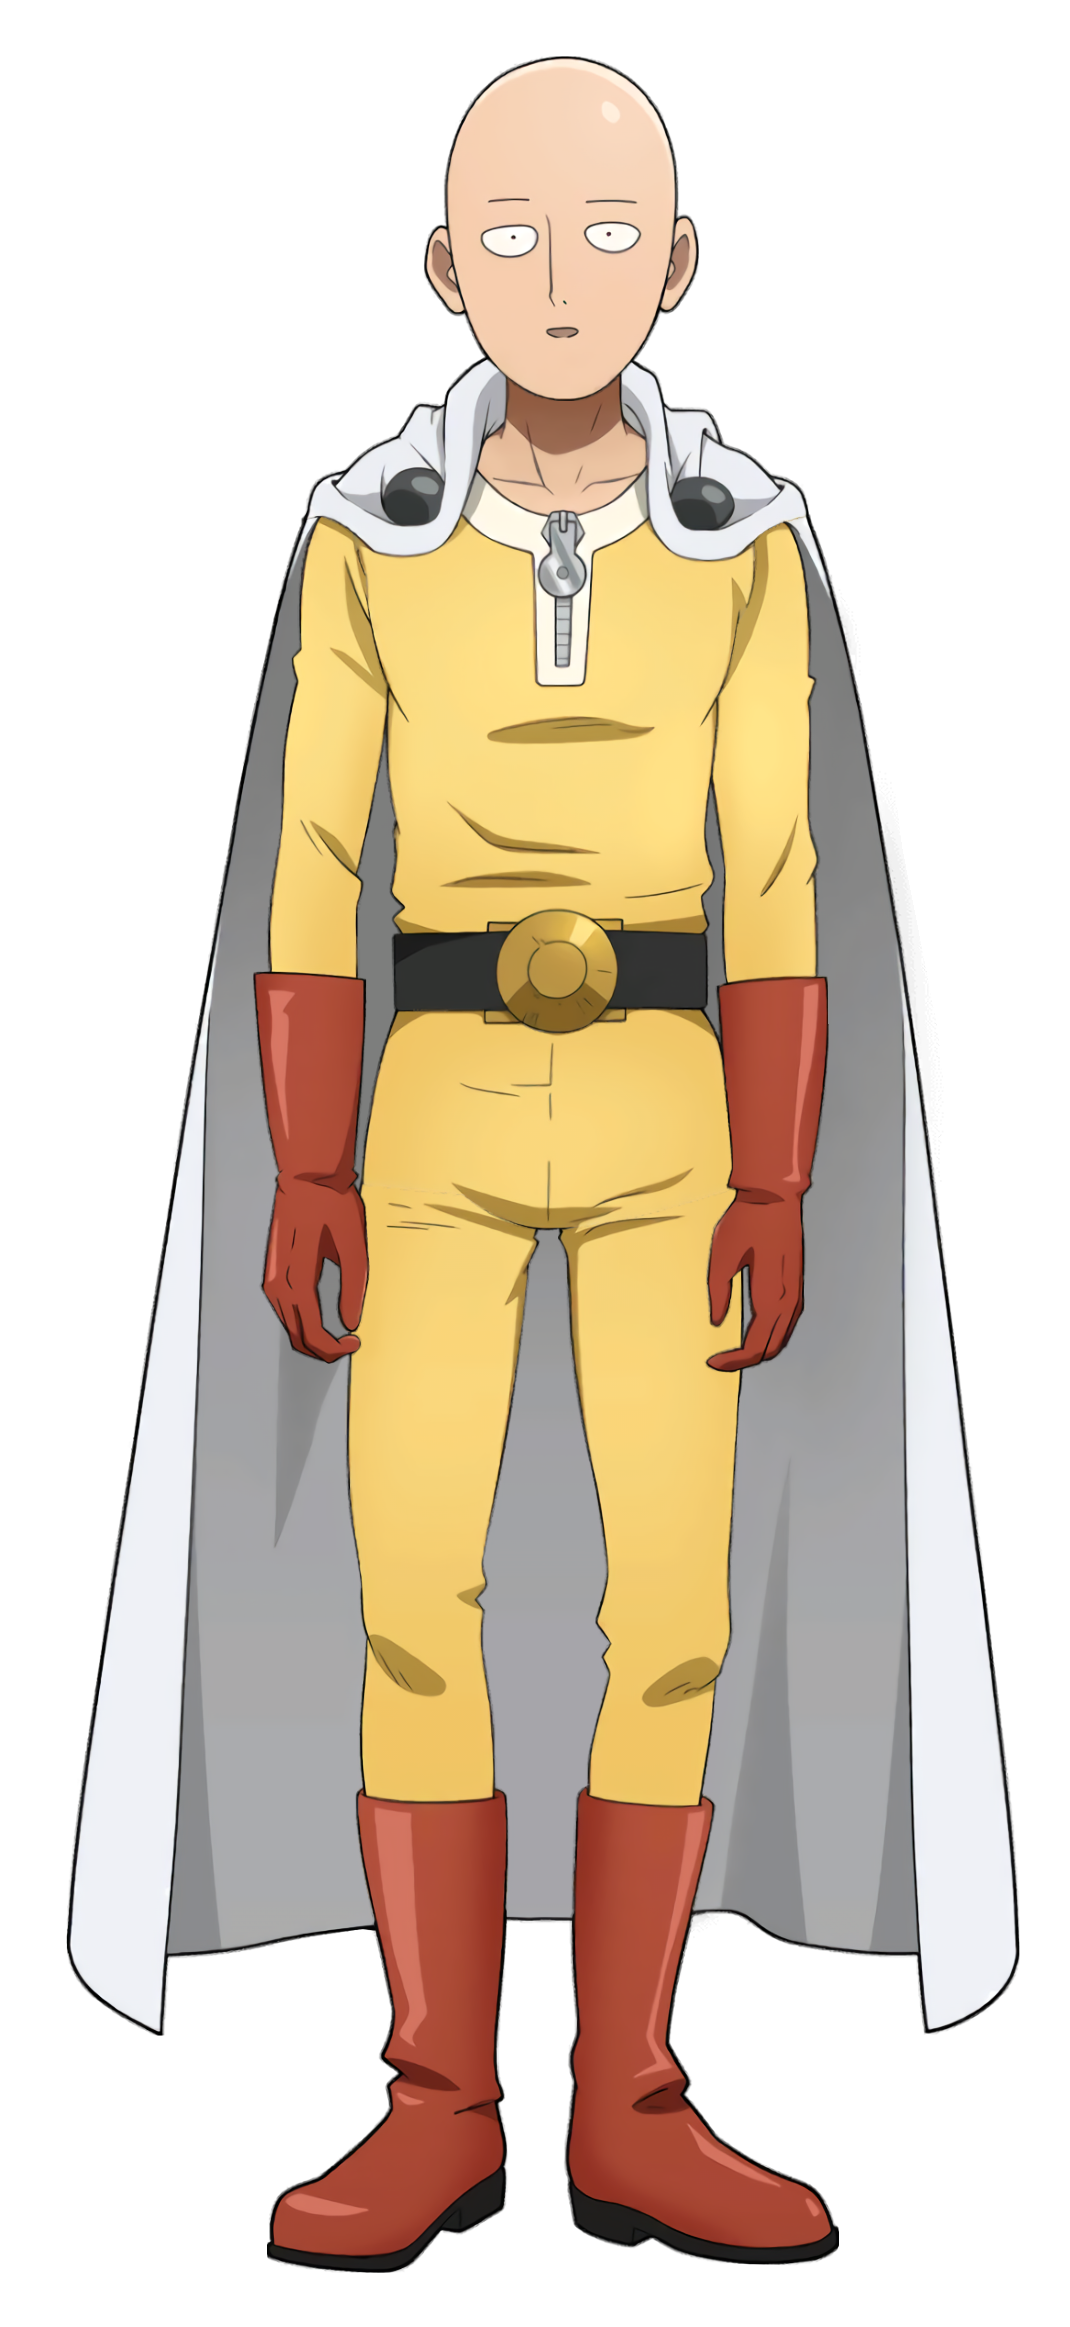 What tier would Saitama be if we used Saitama from fan made The Fight of  Gods as source for his feats?